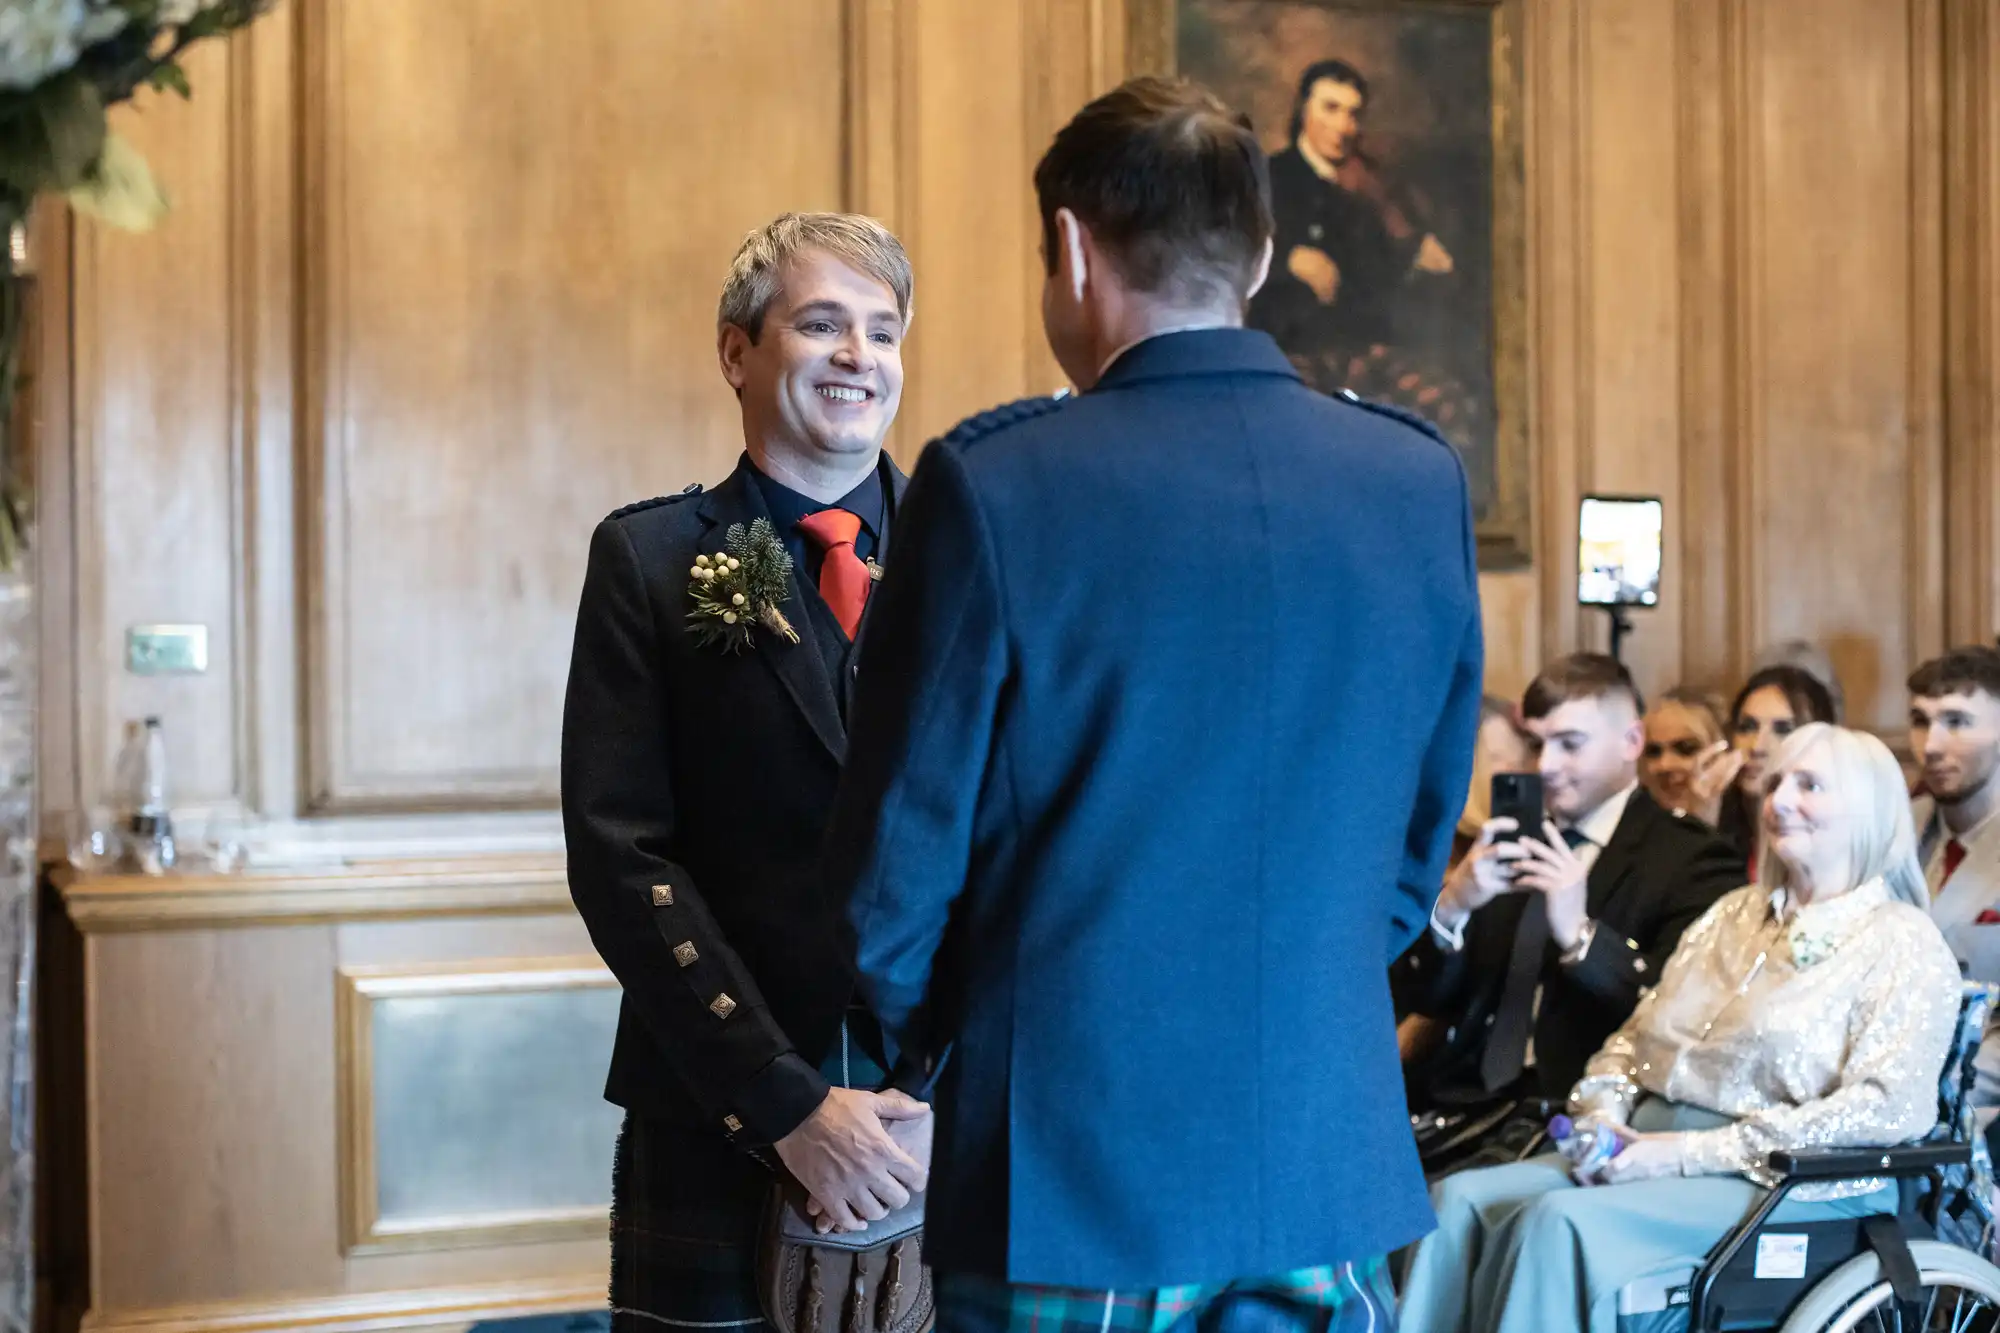 Two men in traditional Scottish attire stand facing each other during a wedding ceremony. Guests are seated in the background, and a person captures the moment on a smartphone.